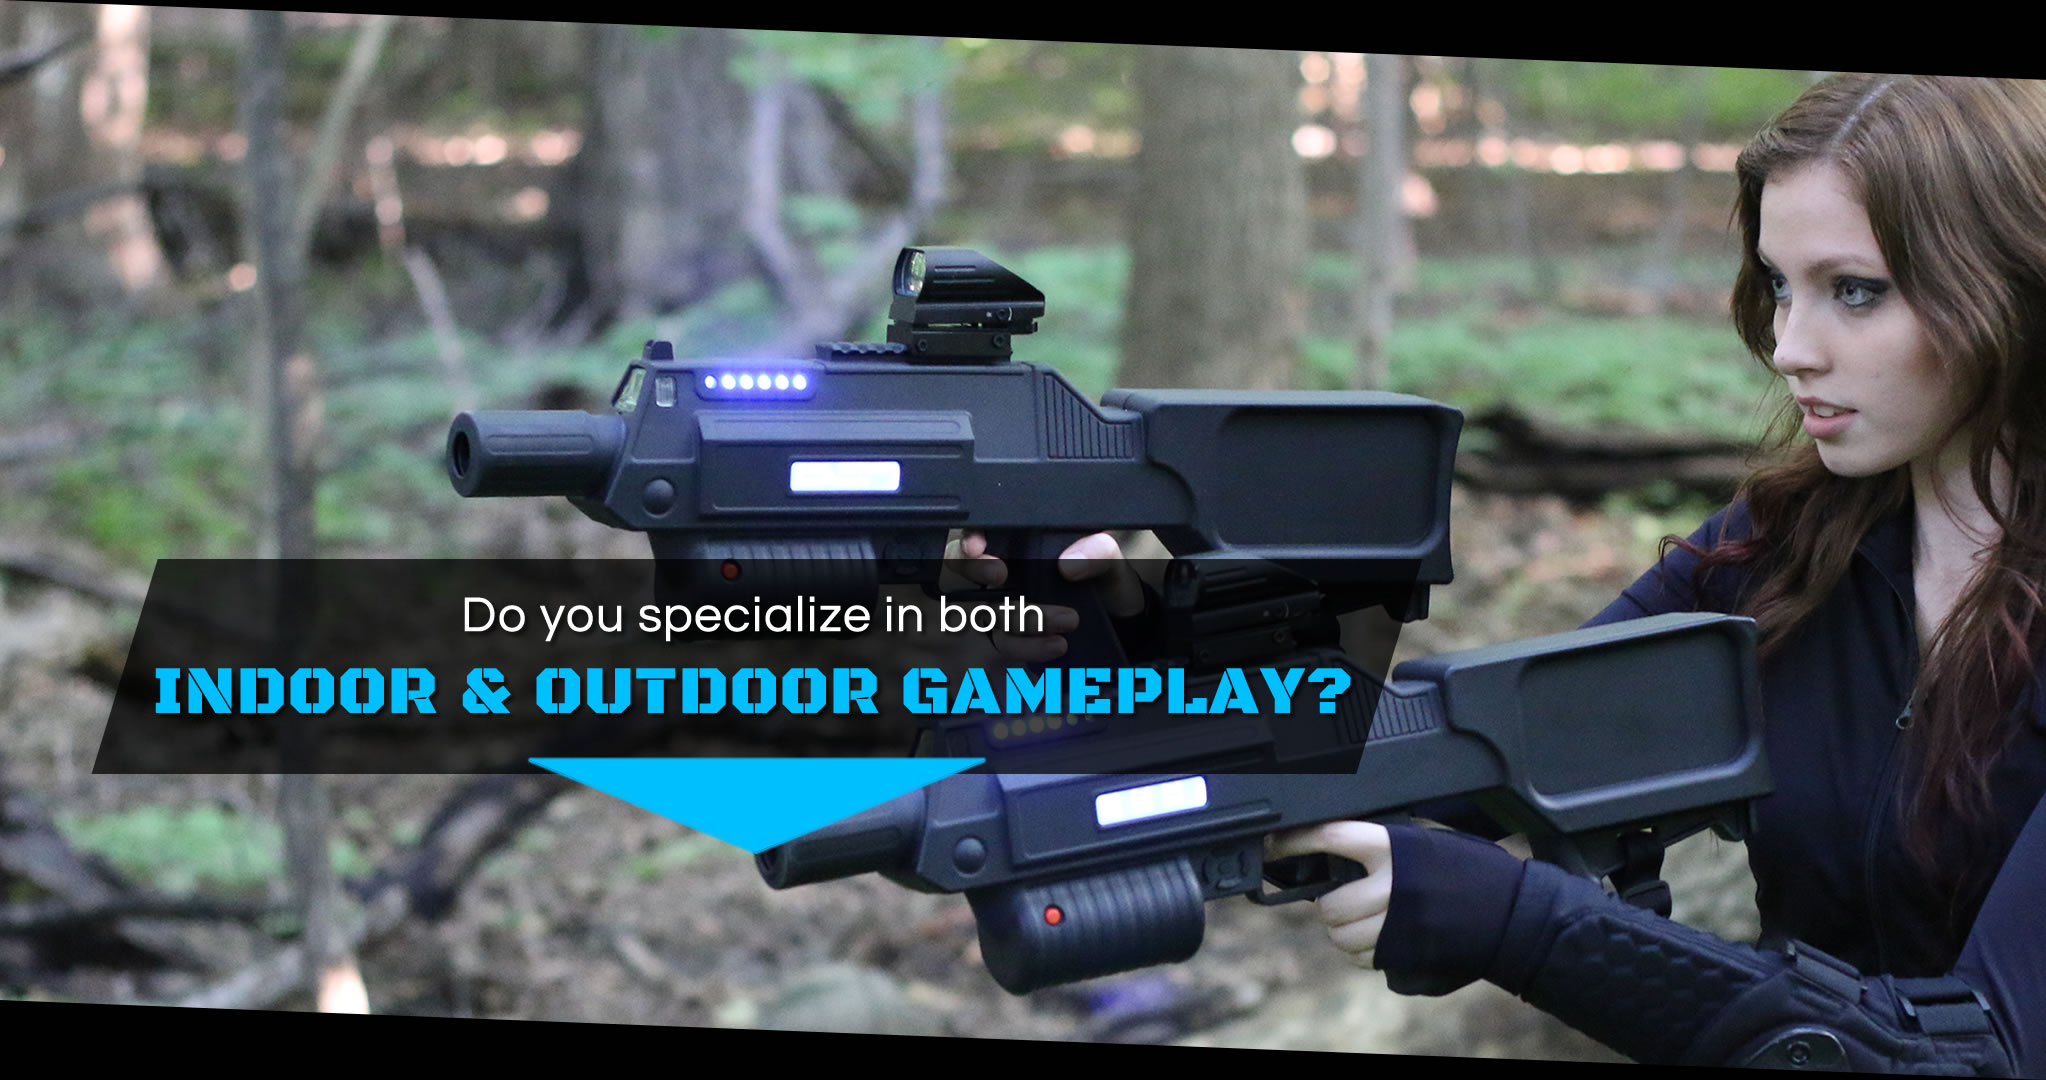 INTAGER - Laser tag equipment for indoor and outdoor laser game